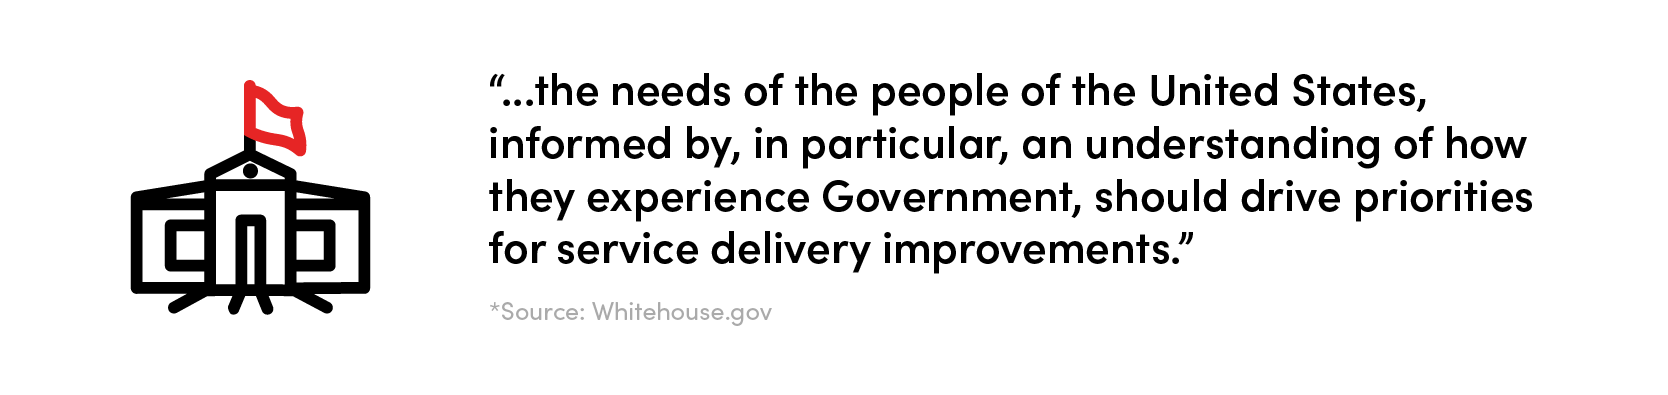 whitehouse.gov citizen experience management quote: the needs of the people of the United States, informed by, in particular, an understanding of how they experience Government, should drive priorities for service delivery improvements.